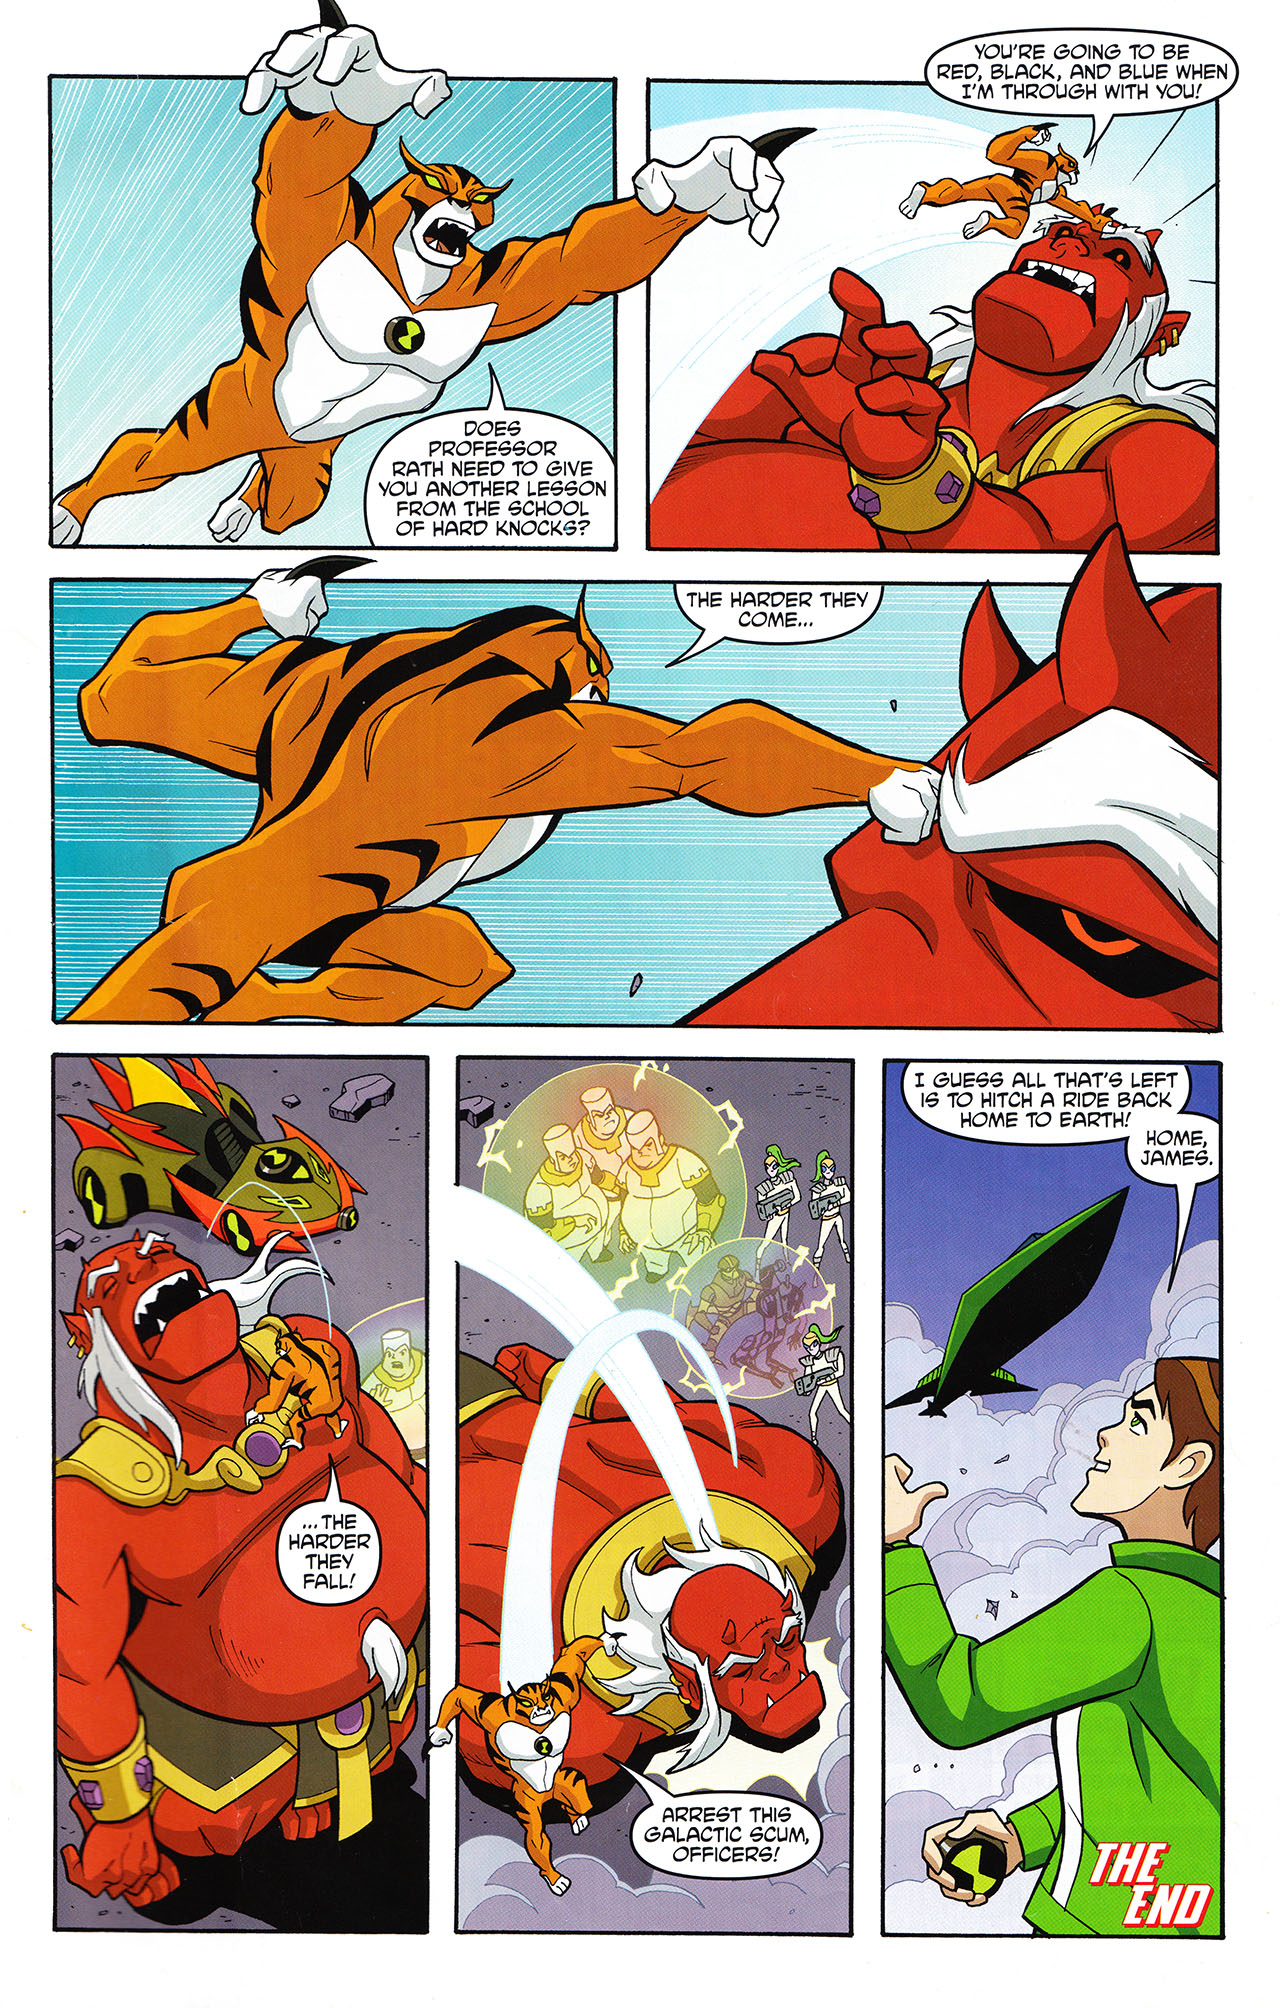 Ben 10 Ultimate Alien Issue 1 | Read Ben 10 Ultimate Alien Issue 1 comic  online in high quality. Read Full Comic online for free - Read comics  online in high quality .|viewcomiconline.com